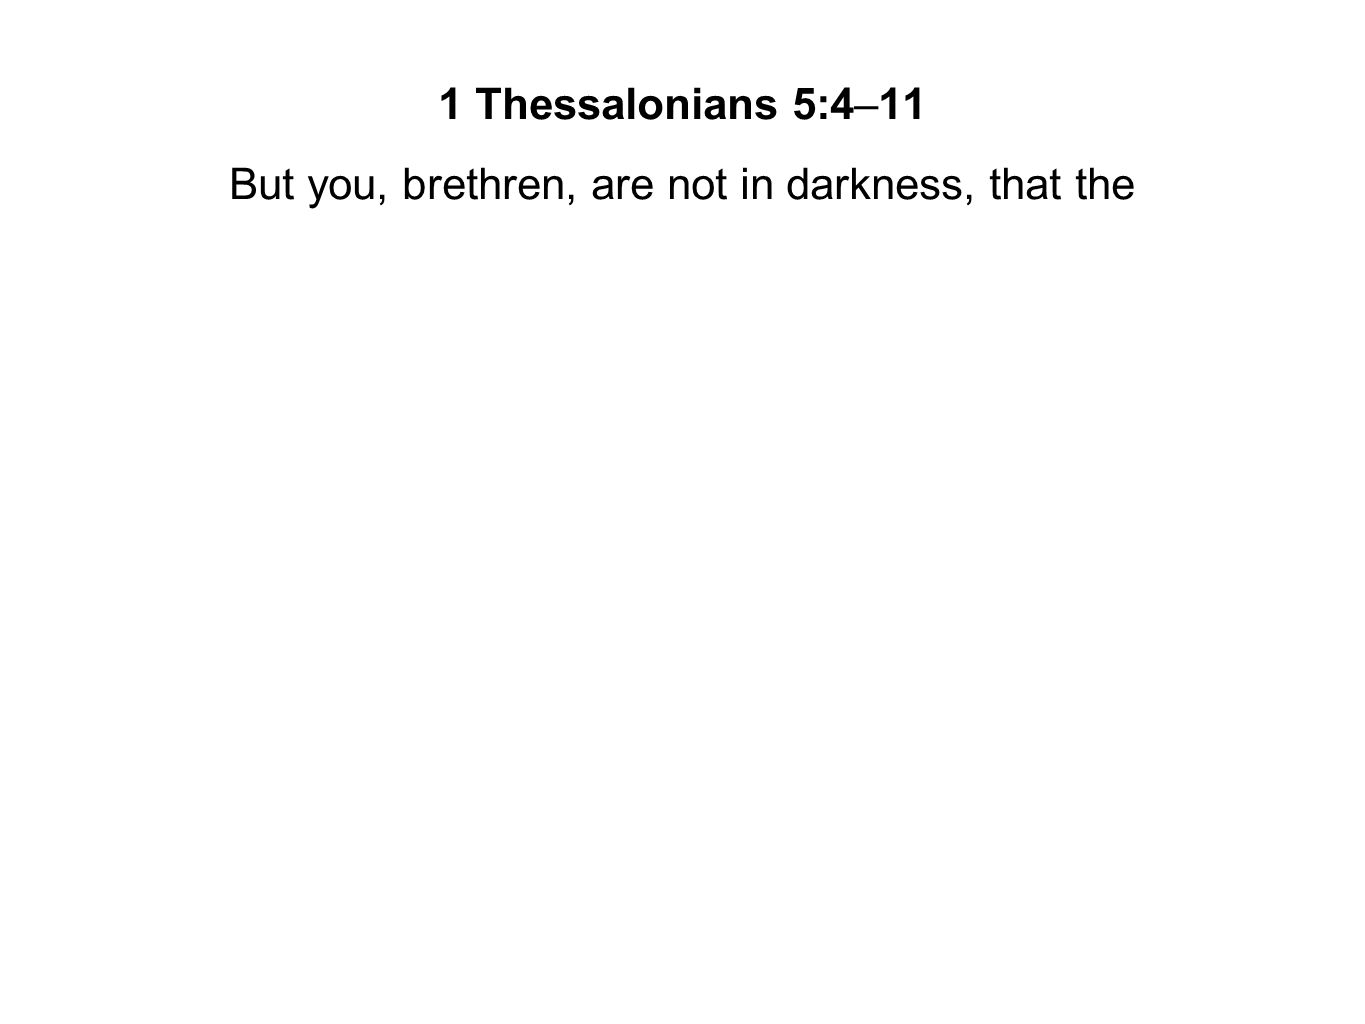 But you, brethren, are not in darkness, that the